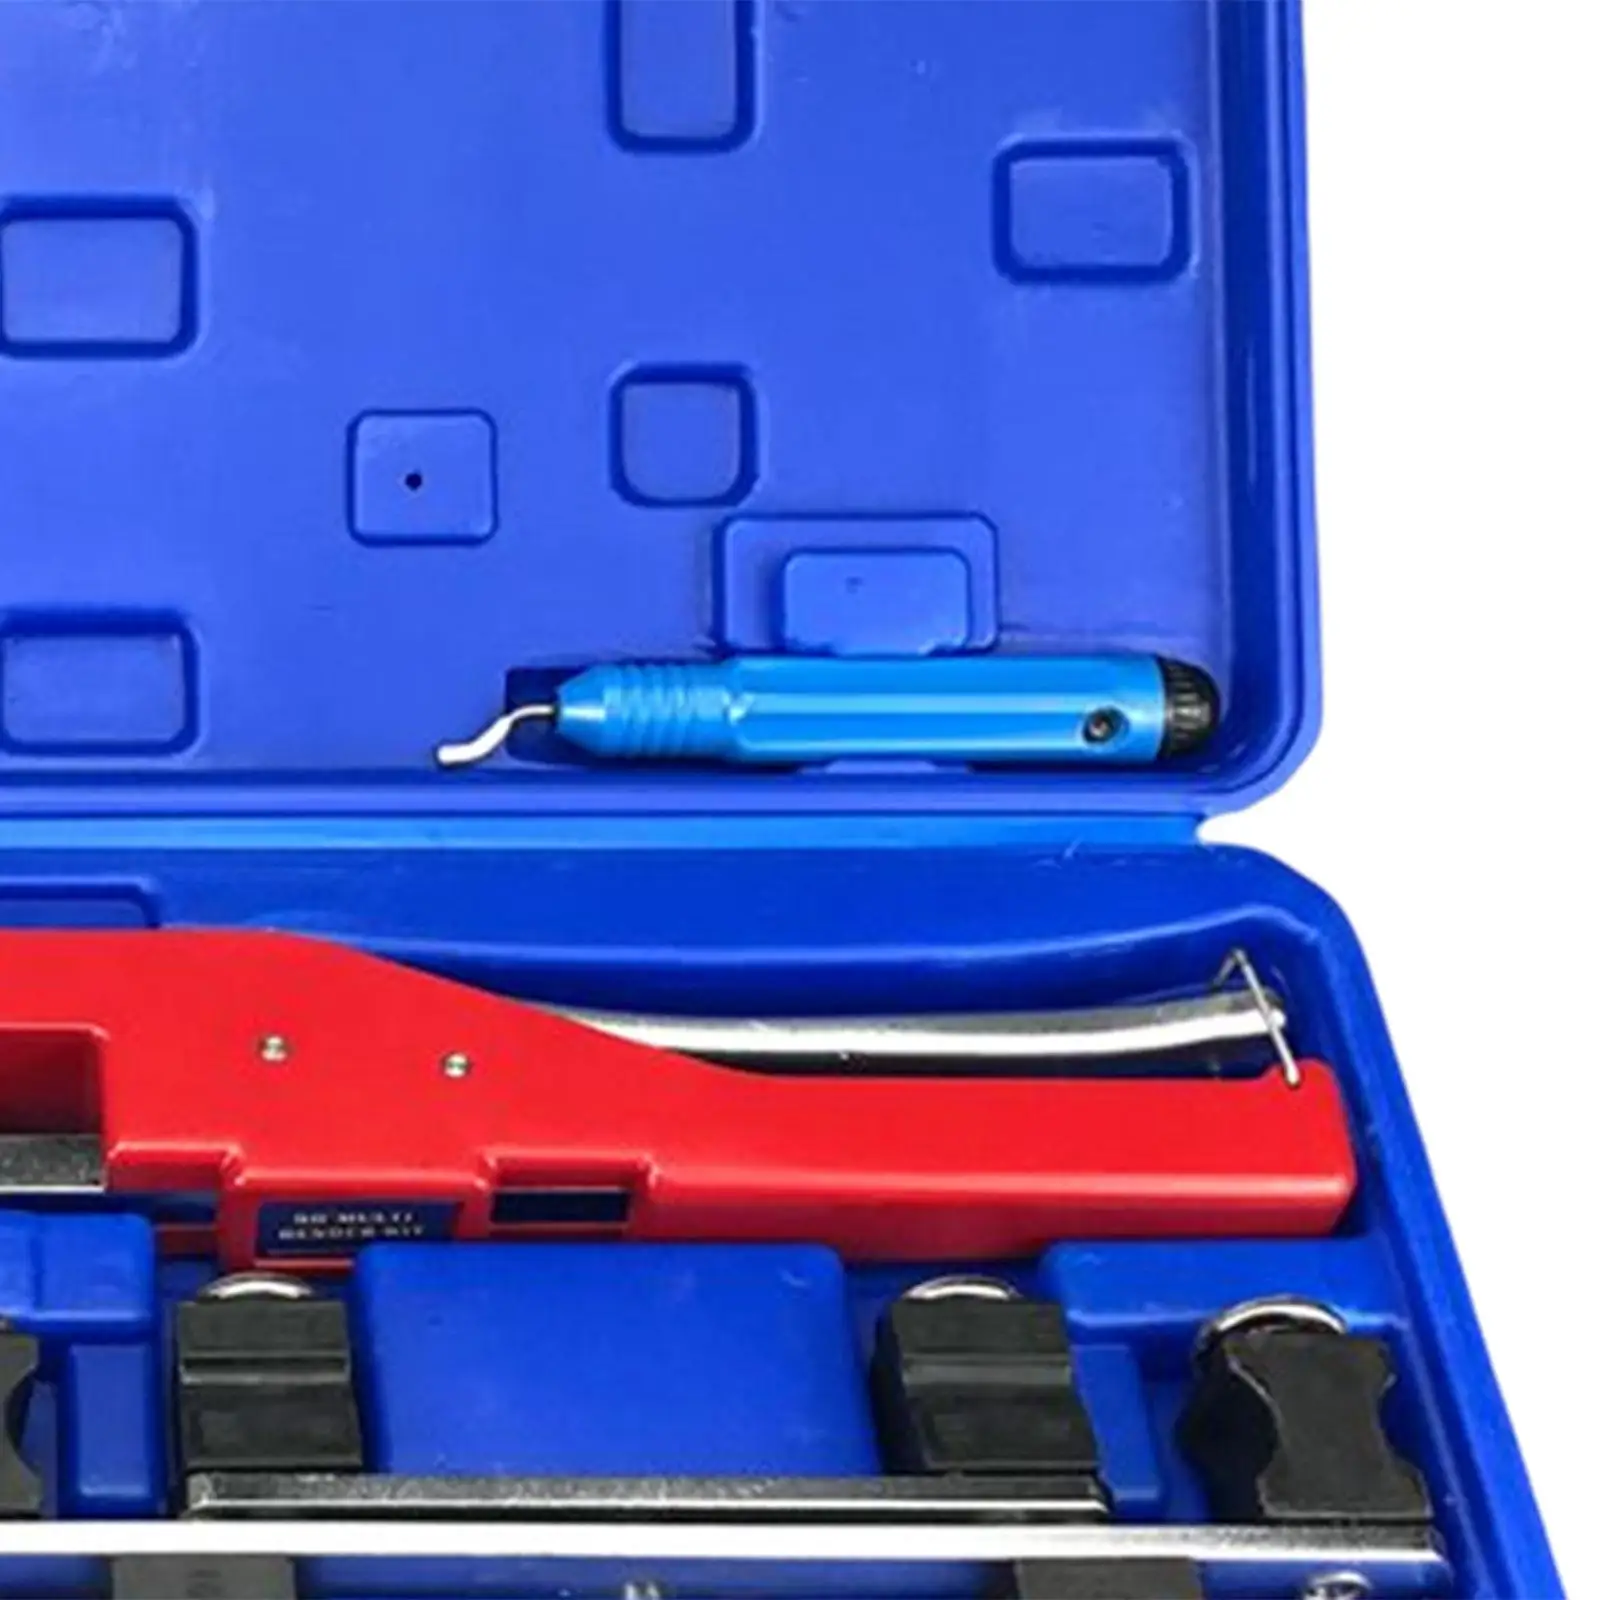 Pipe Bender Kits Durable Ergonomic Design ct 999F 1/4 to 7/8 inch Hand Tool for Aluminum Pipe Copper Pipe Threading Pipe